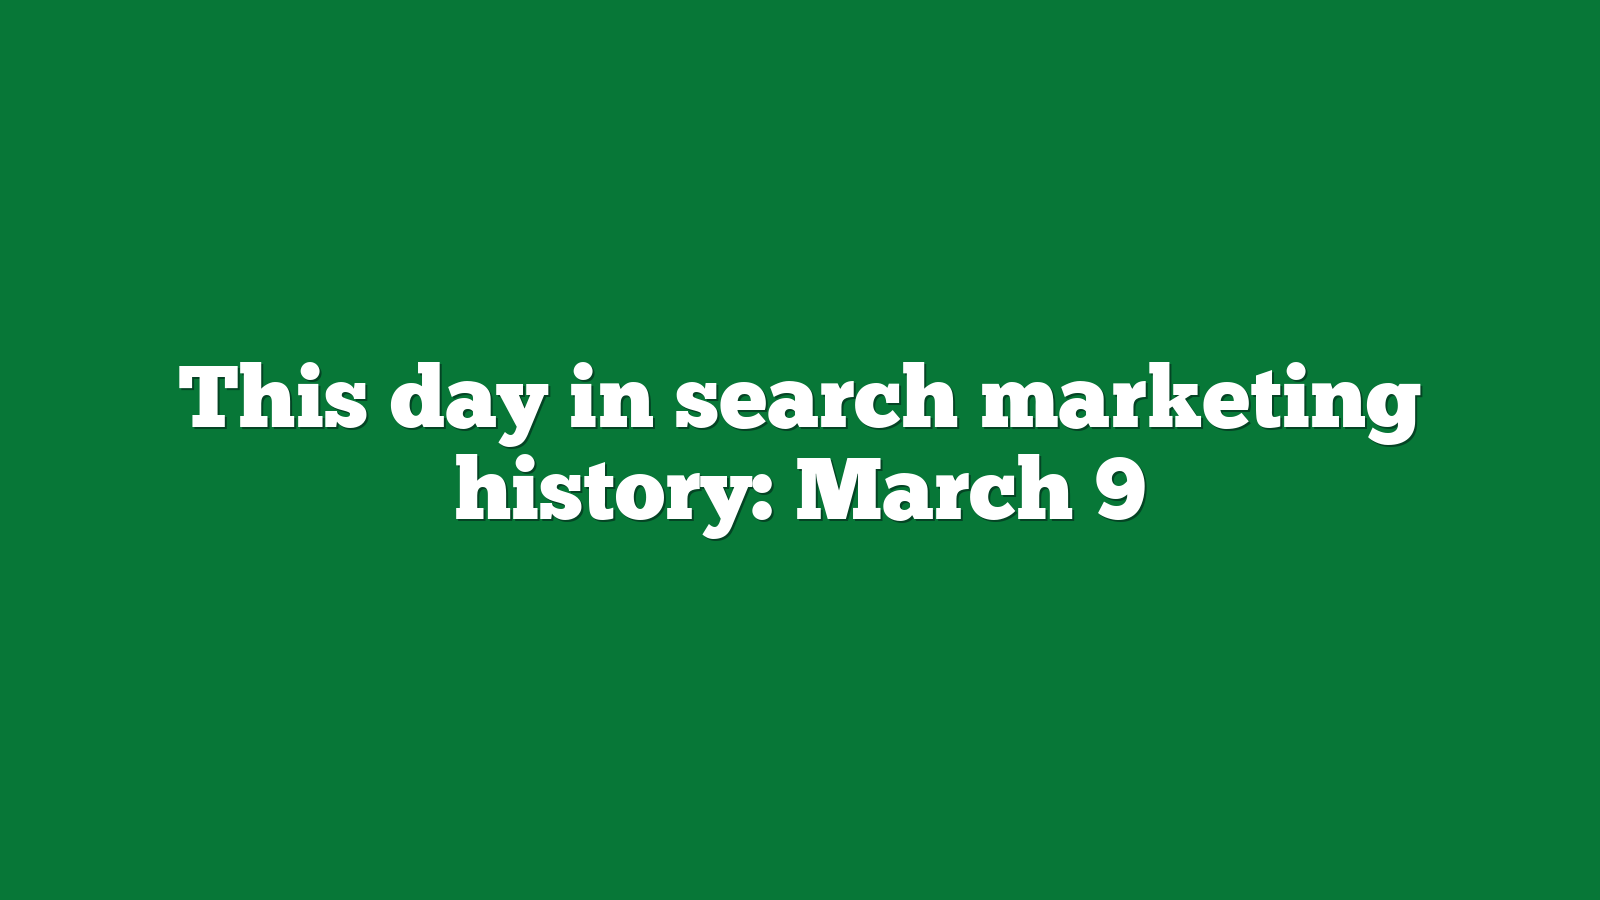 This day in search marketing history: March 9